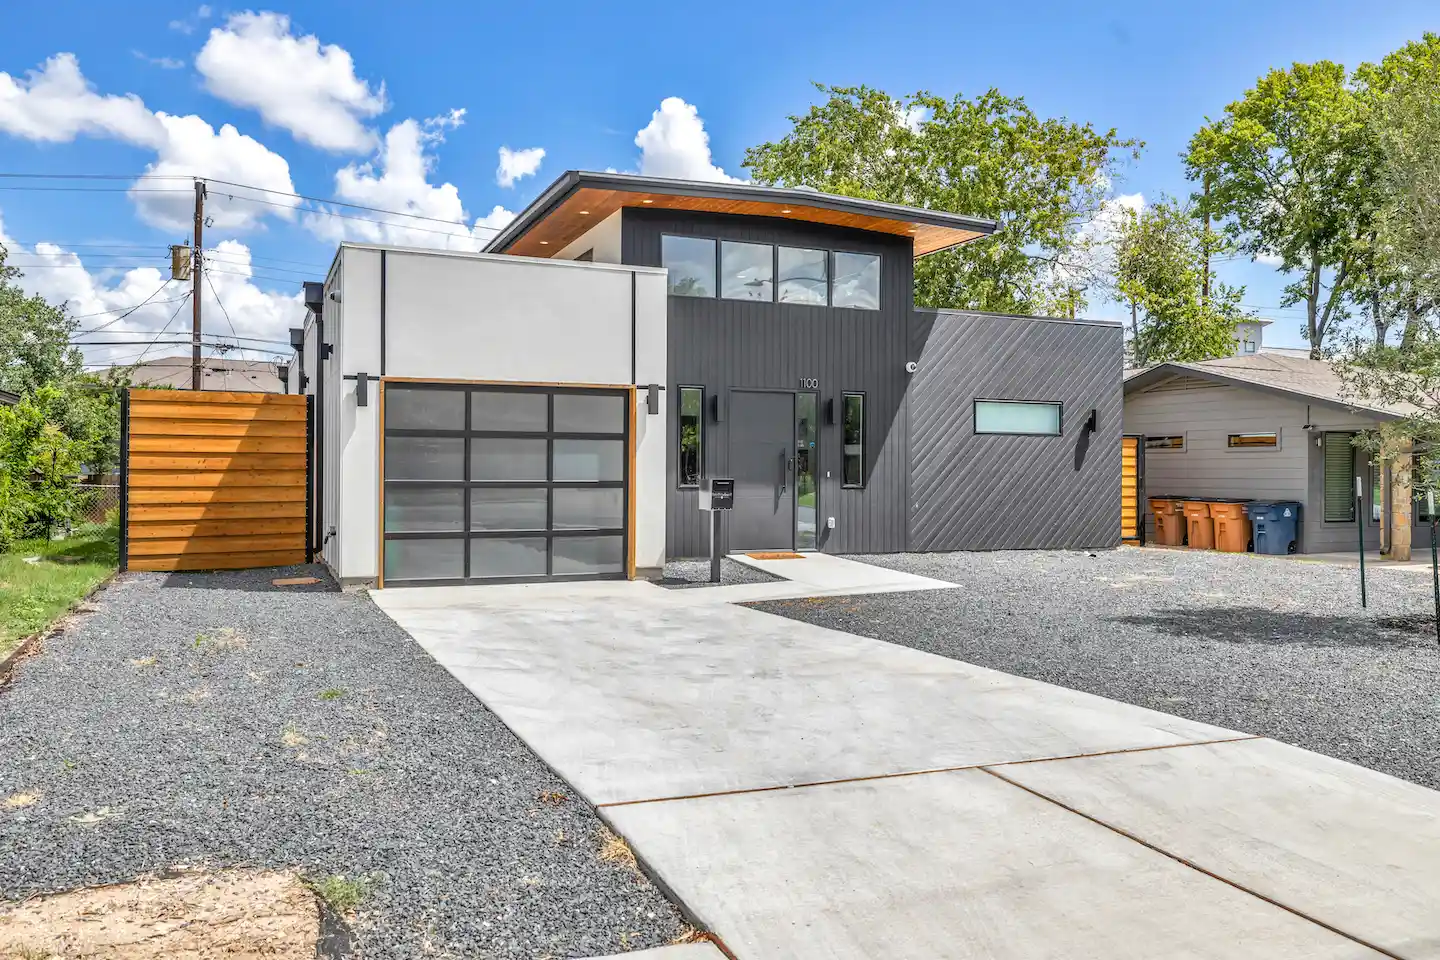 Rental property in Austin, Texas with gray, industrial exterior and orange wooden accents.